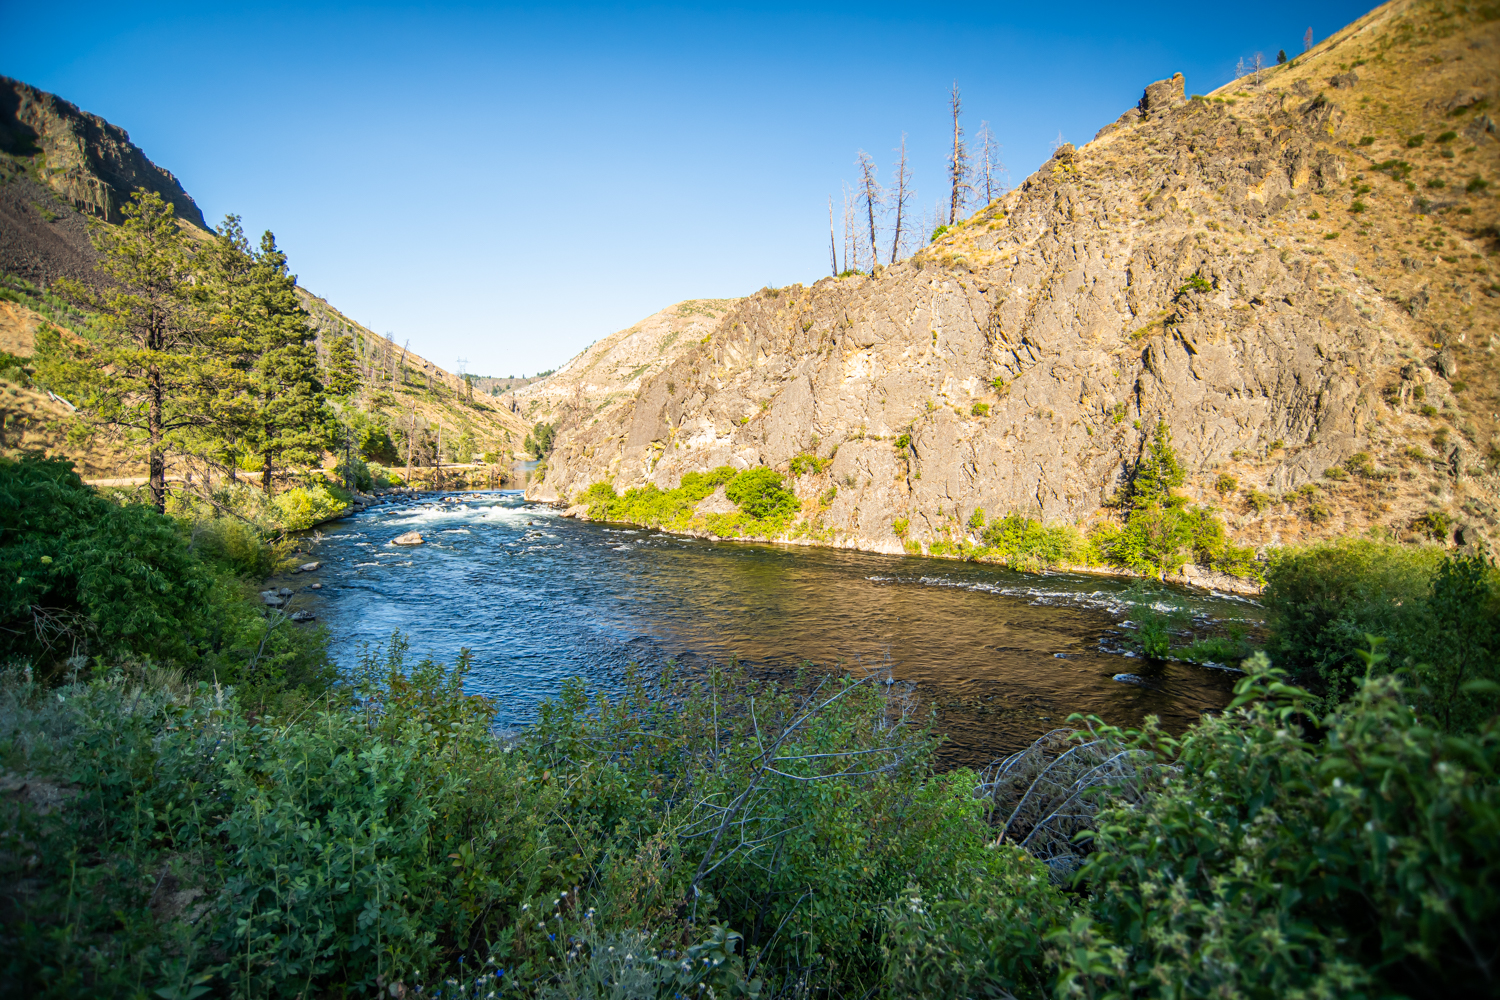 The South Fork of the Boise River below Anderson Ranch Dam in Idaho